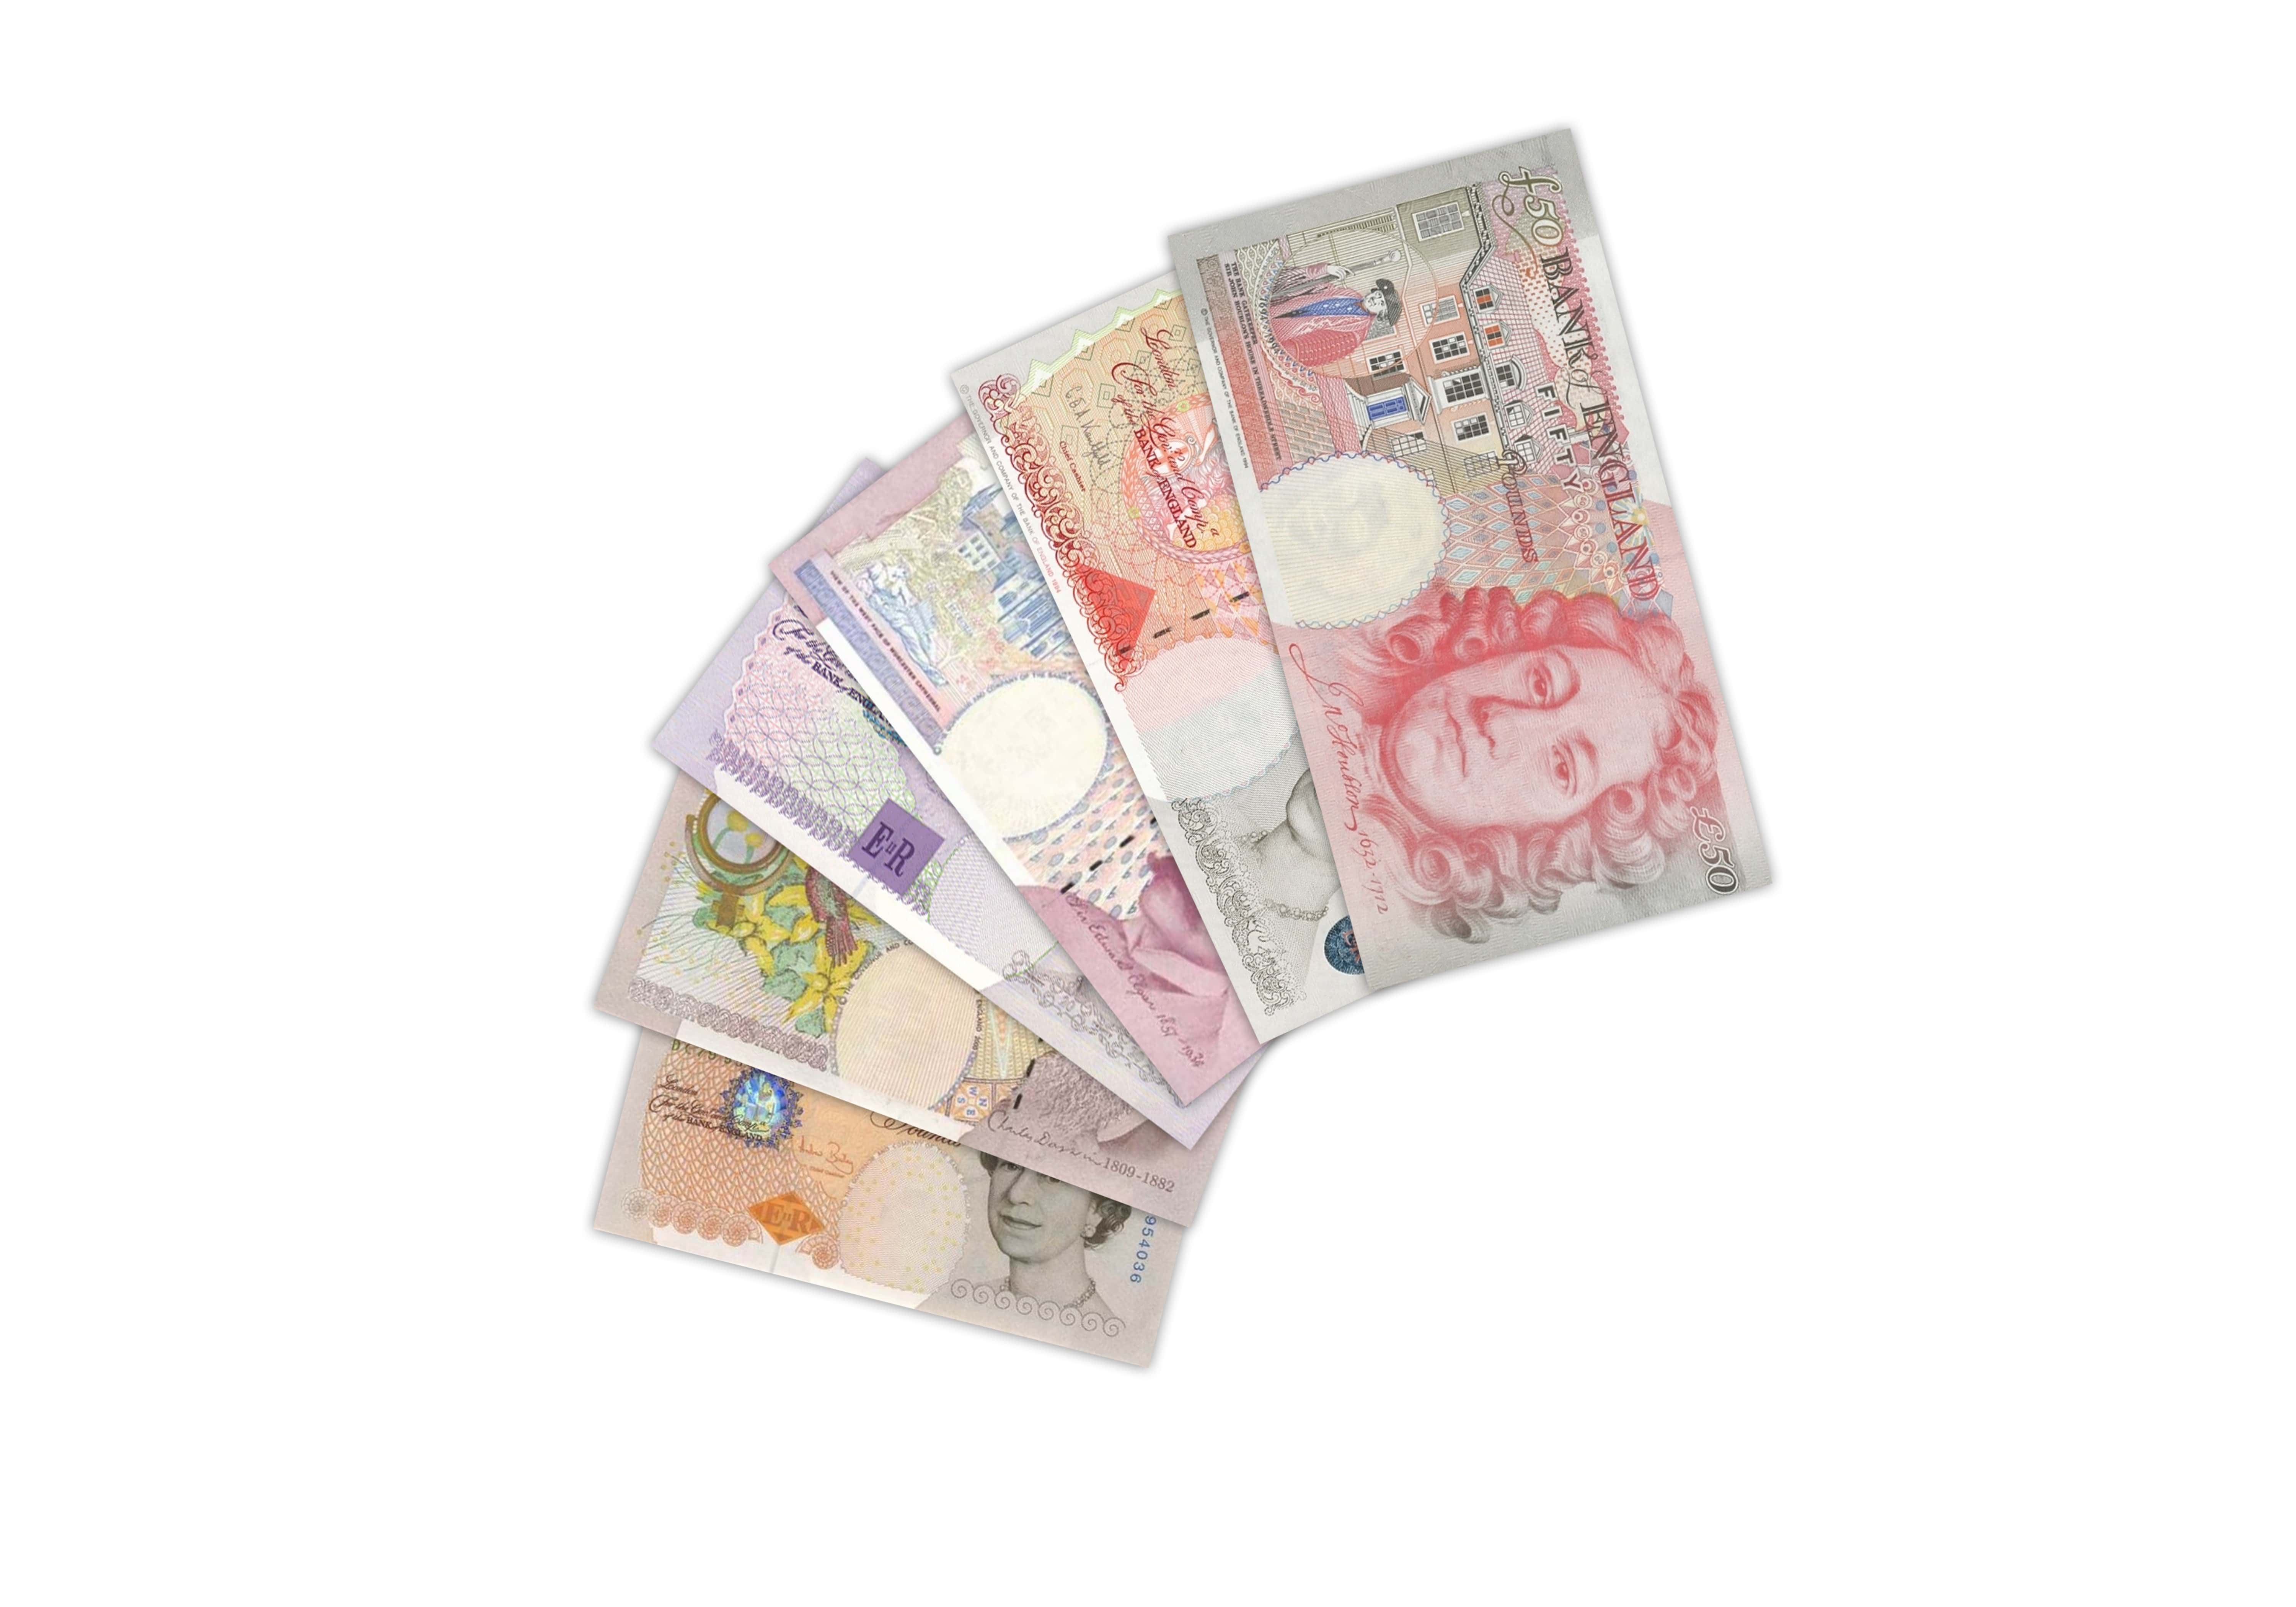 All Pound Sterling related banknotes